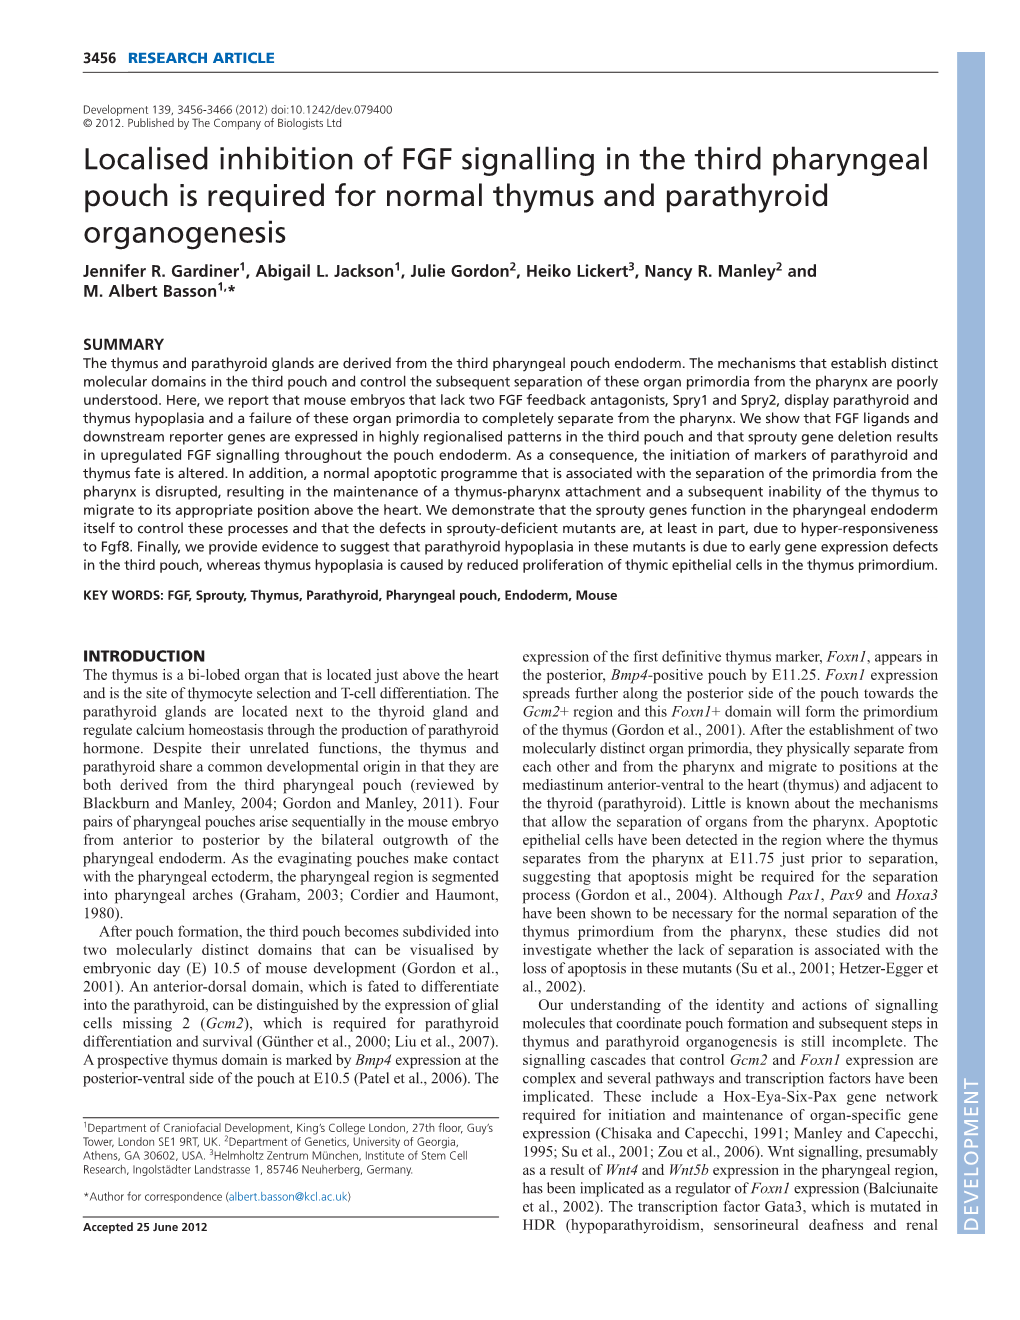 Localised Inhibition of FGF Signalling in the Third Pharyngeal Pouch Is Required for Normal Thymus and Parathyroid Organogenesis Jennifer R